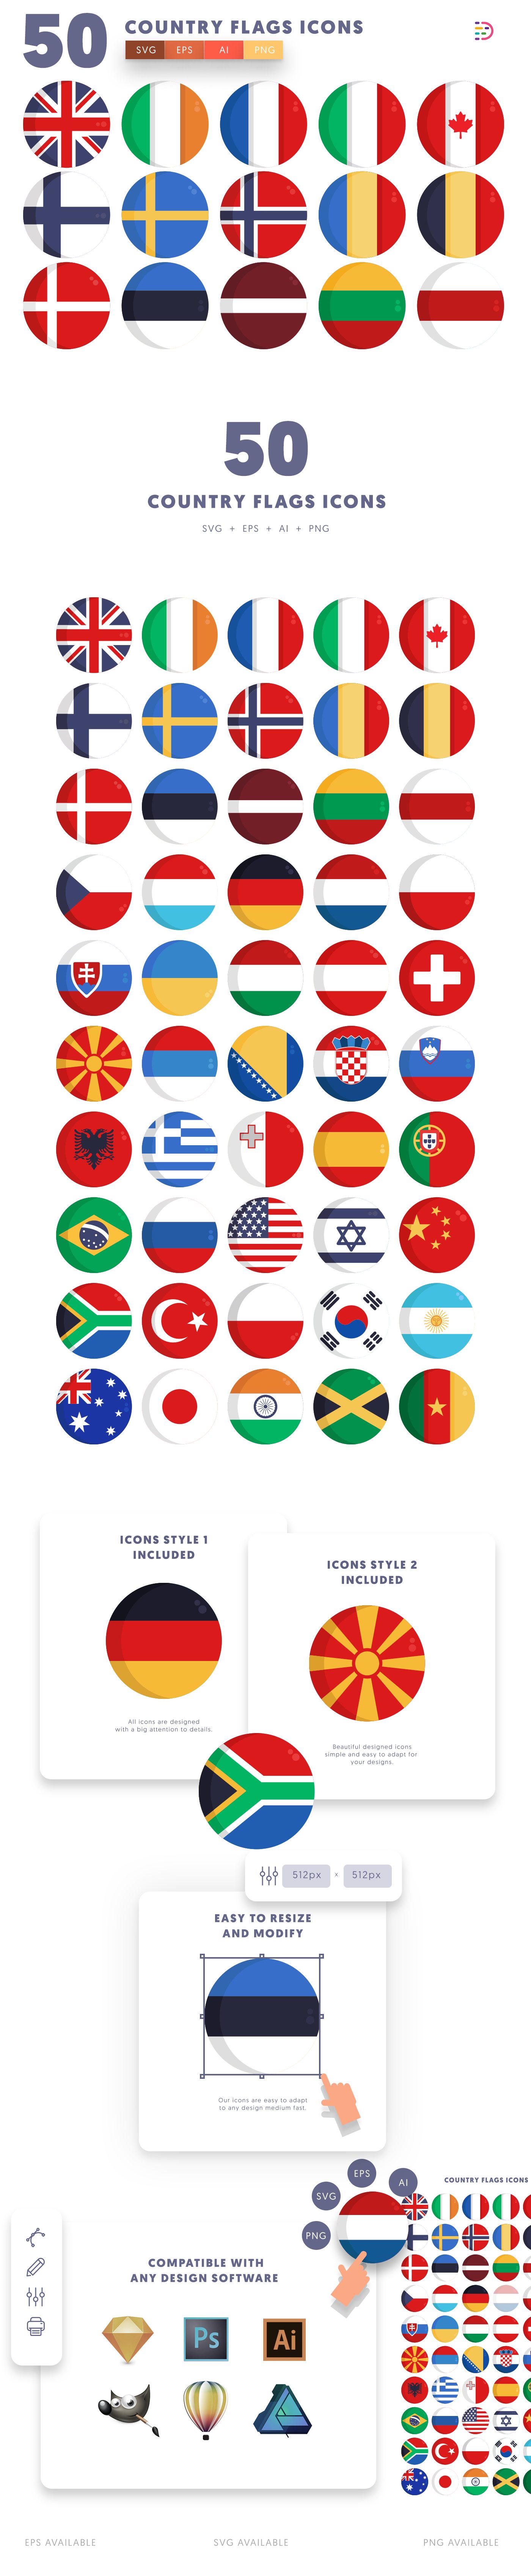 Editable Country Flags icons icon pack, easy to edit and customize icons